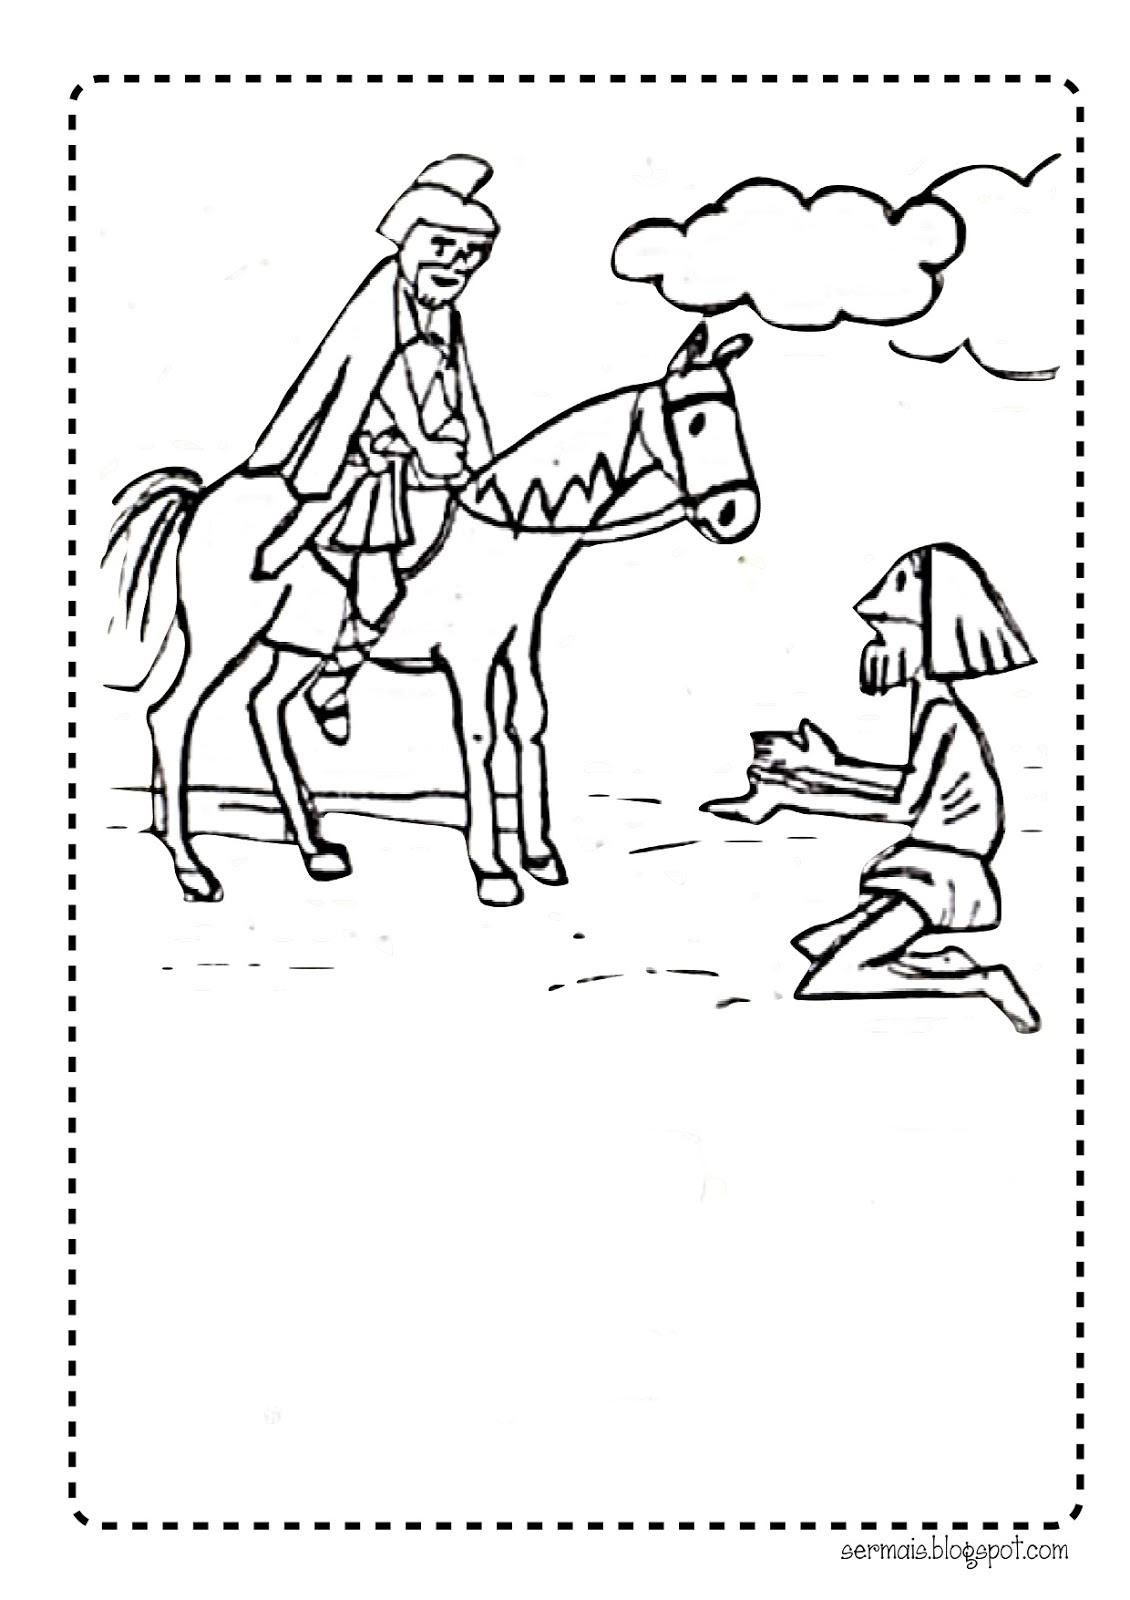 56 Cartoon St Martin De Porres Coloring Page with disney character